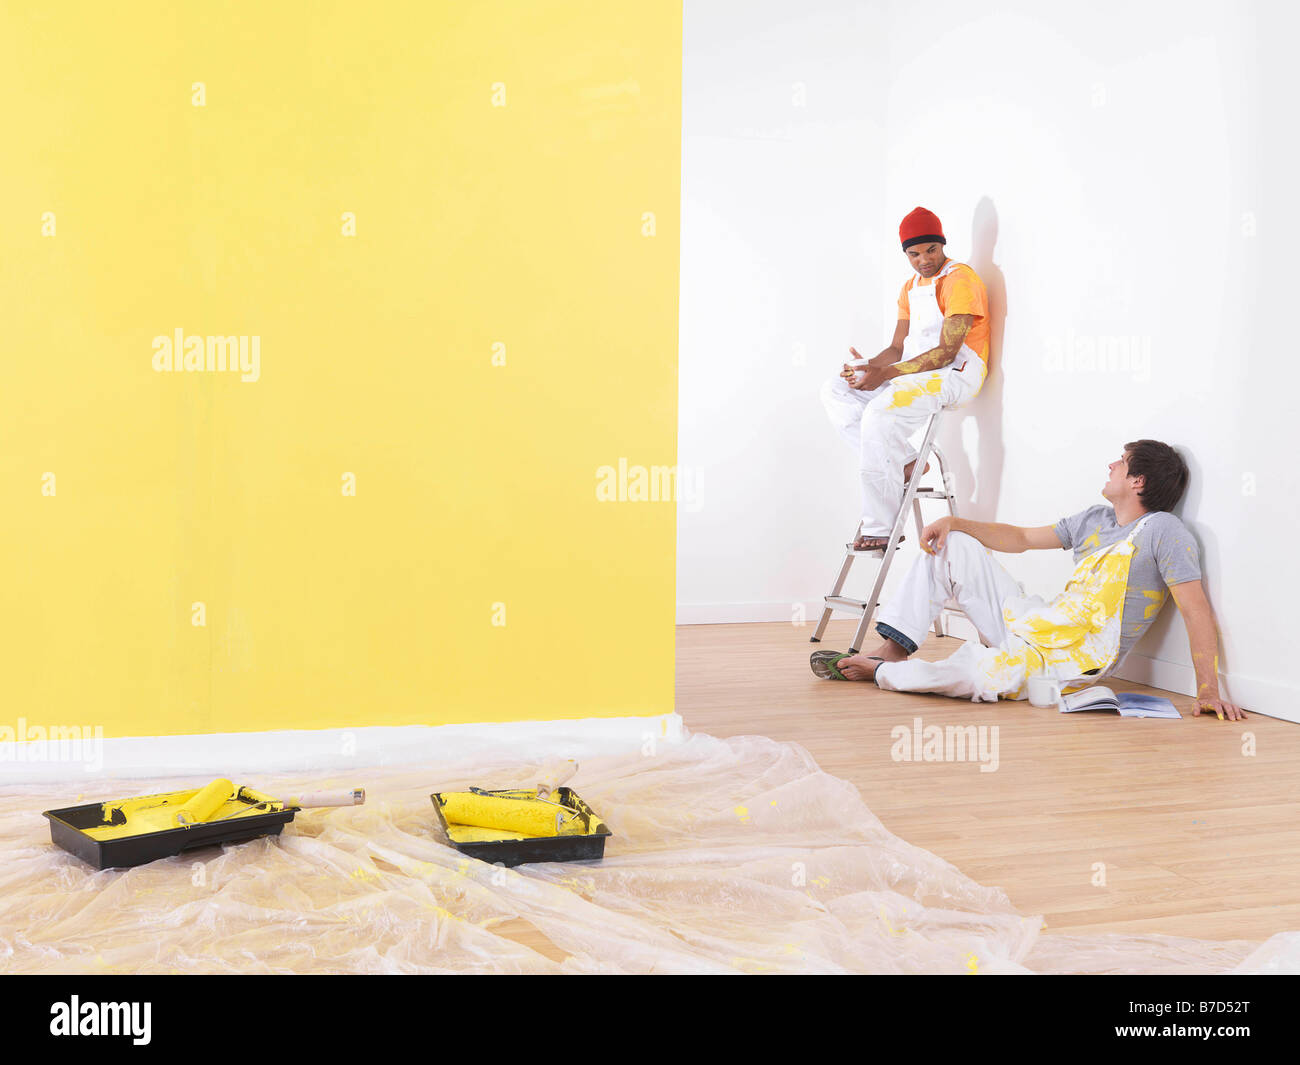 Men take a break from painting. Stock Photo